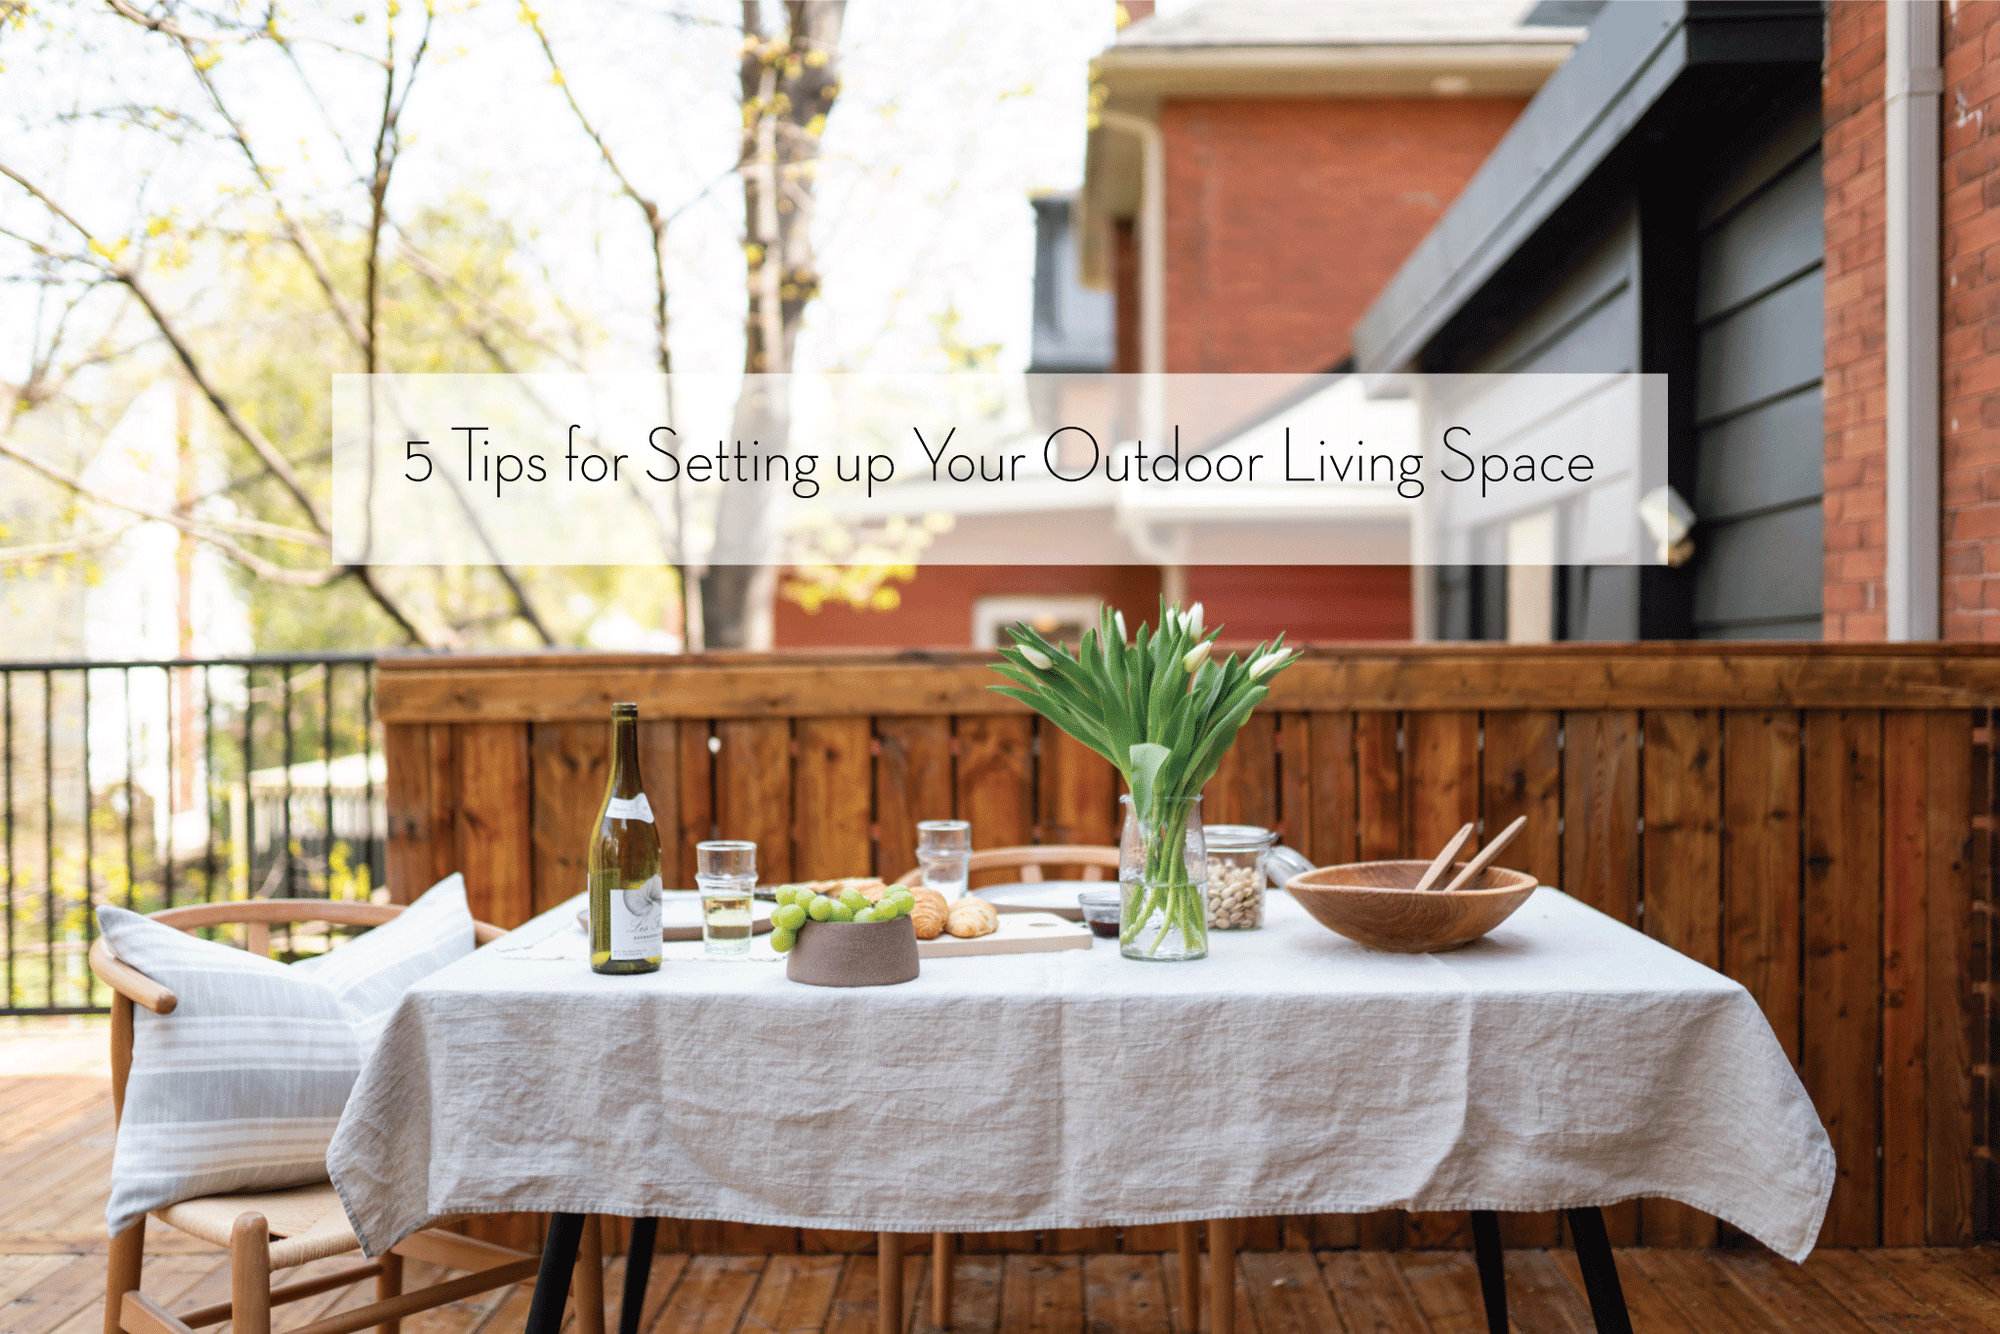 5 Tips for Setting up Your Outdoor Living Space